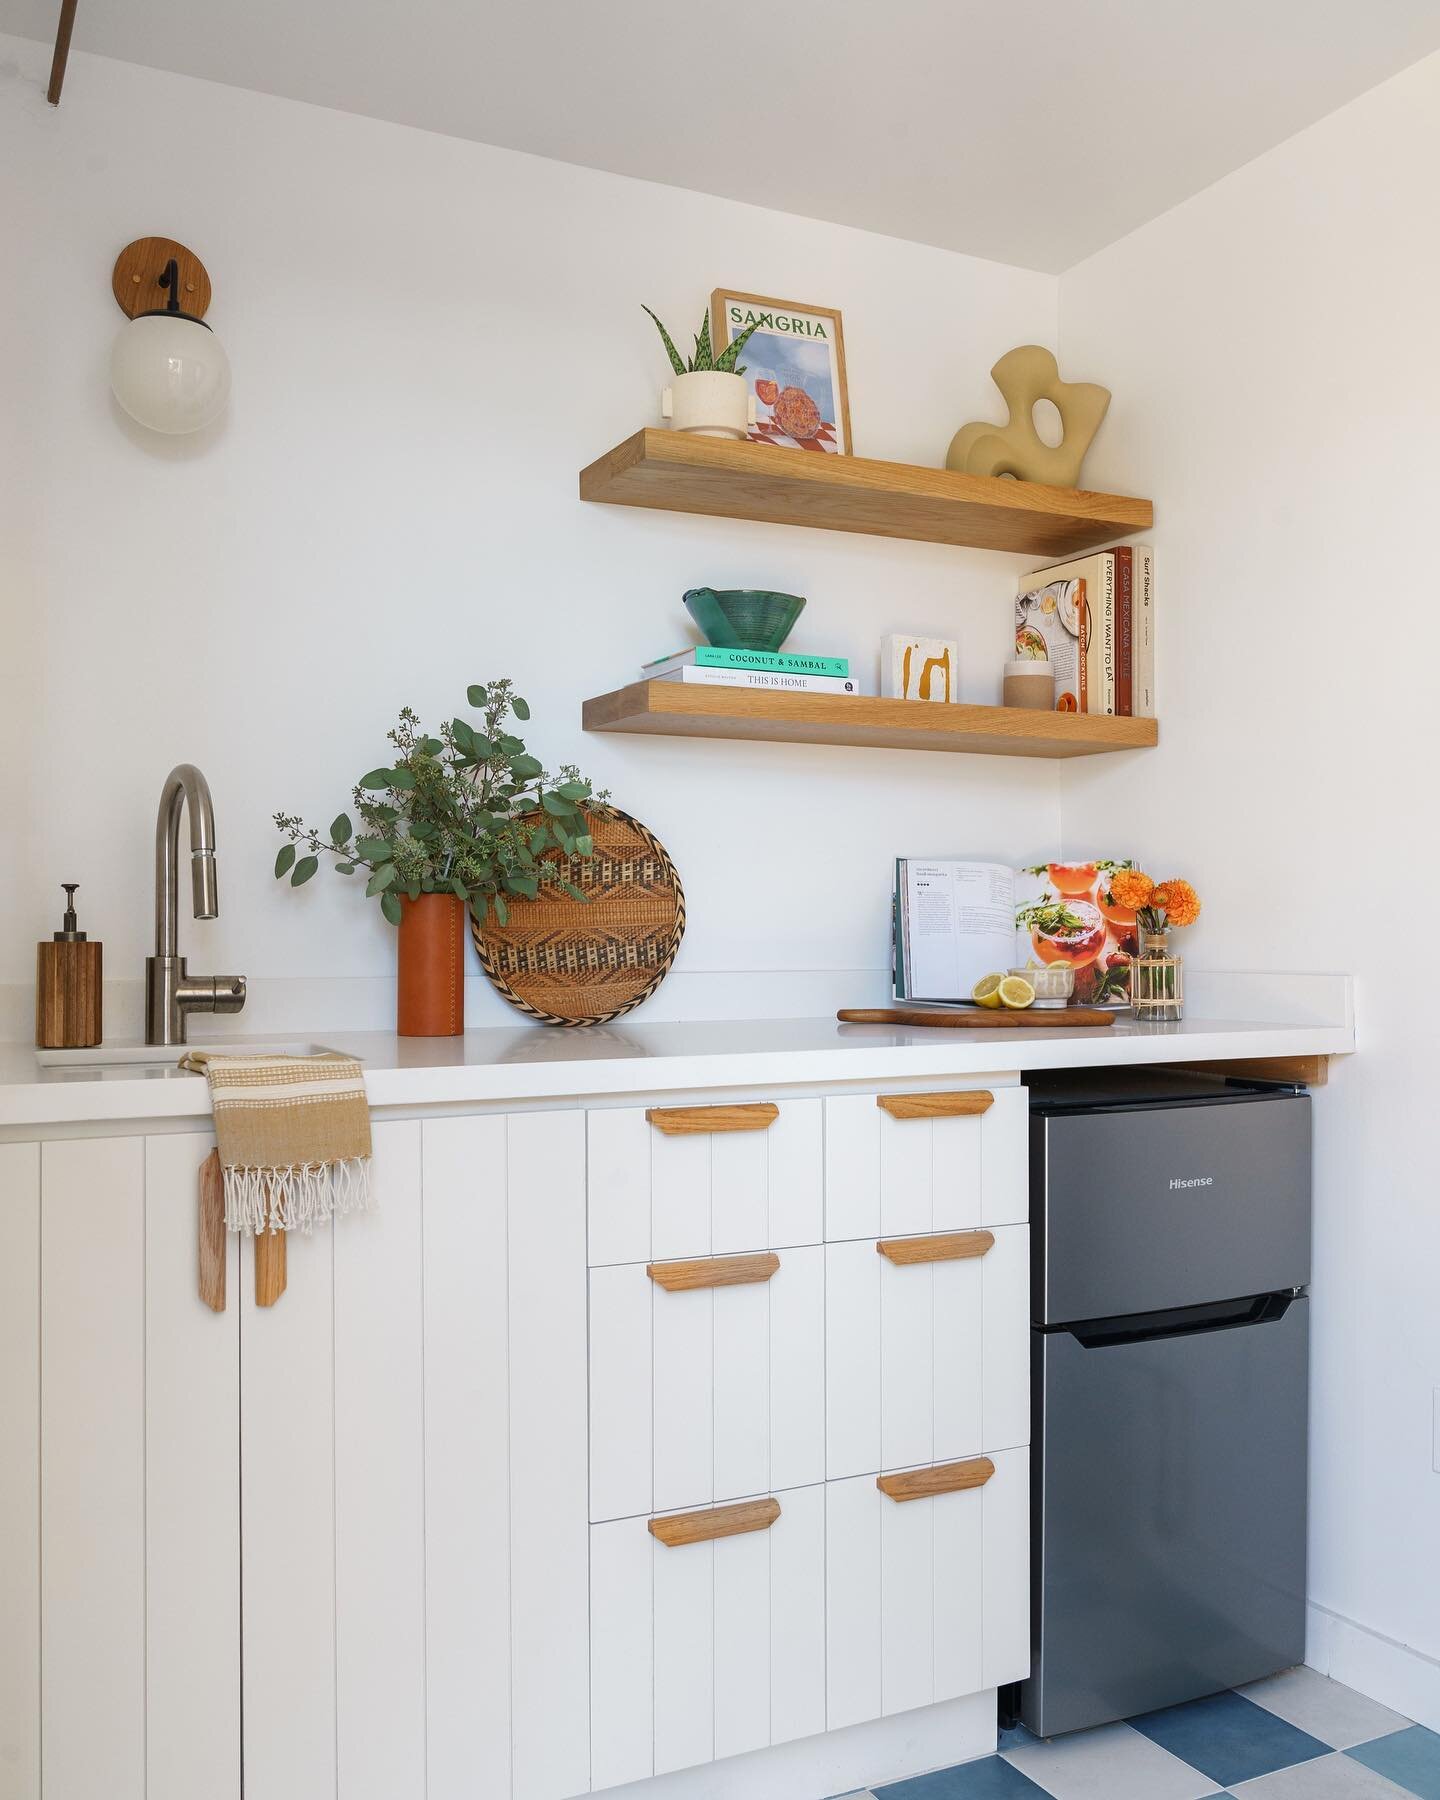 Swipe to see what this rooftop closet use to look like! We turned a small space into a kitchenette, and I could&rsquo;t be happier with the results. 📸 by @charlotteleaphotography Design by Popix Designs